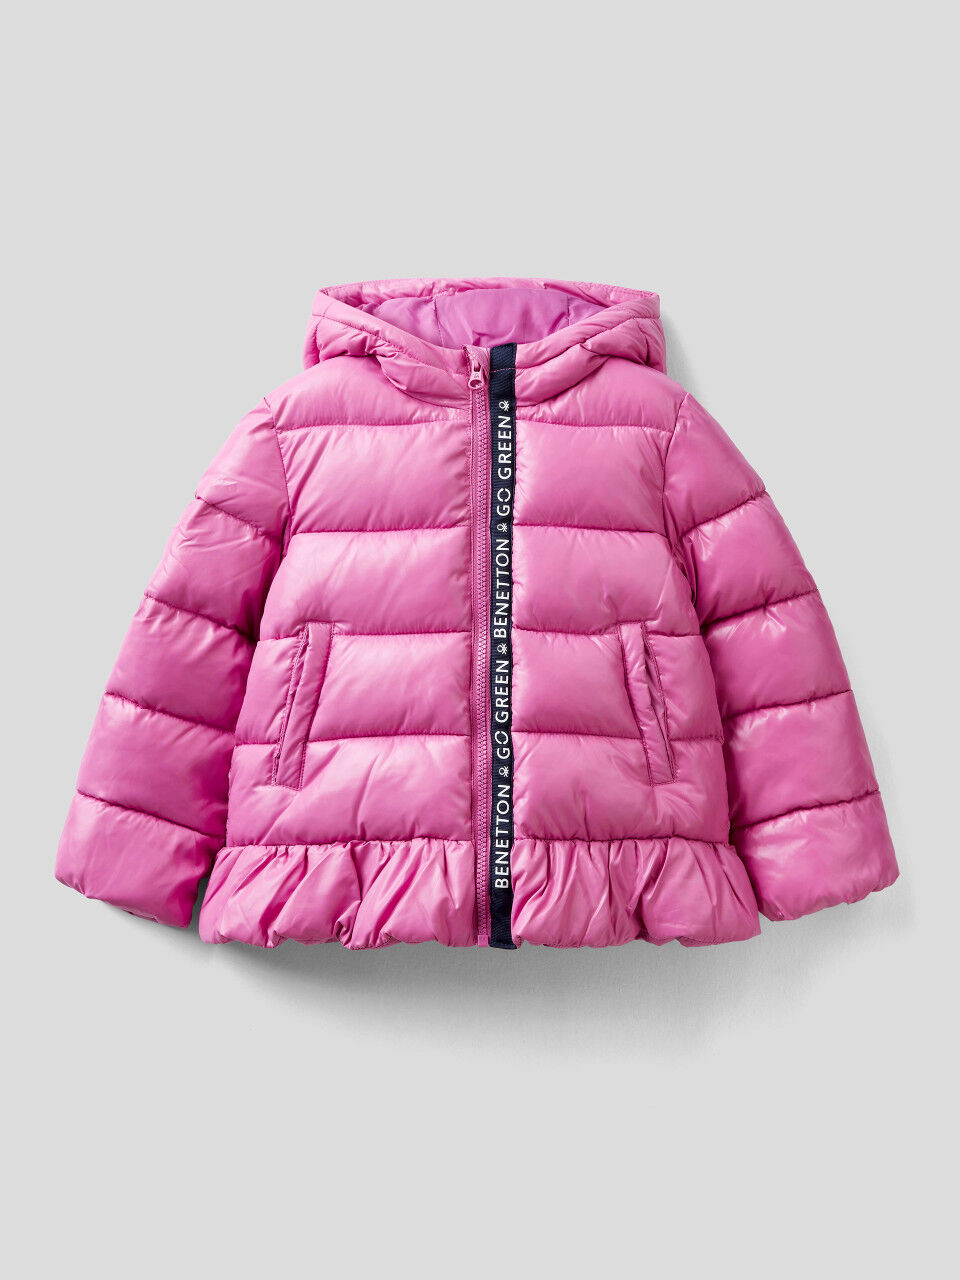 convergence Distract gap Kid Girls' Light Jackets New Collection 2023 | Benetton